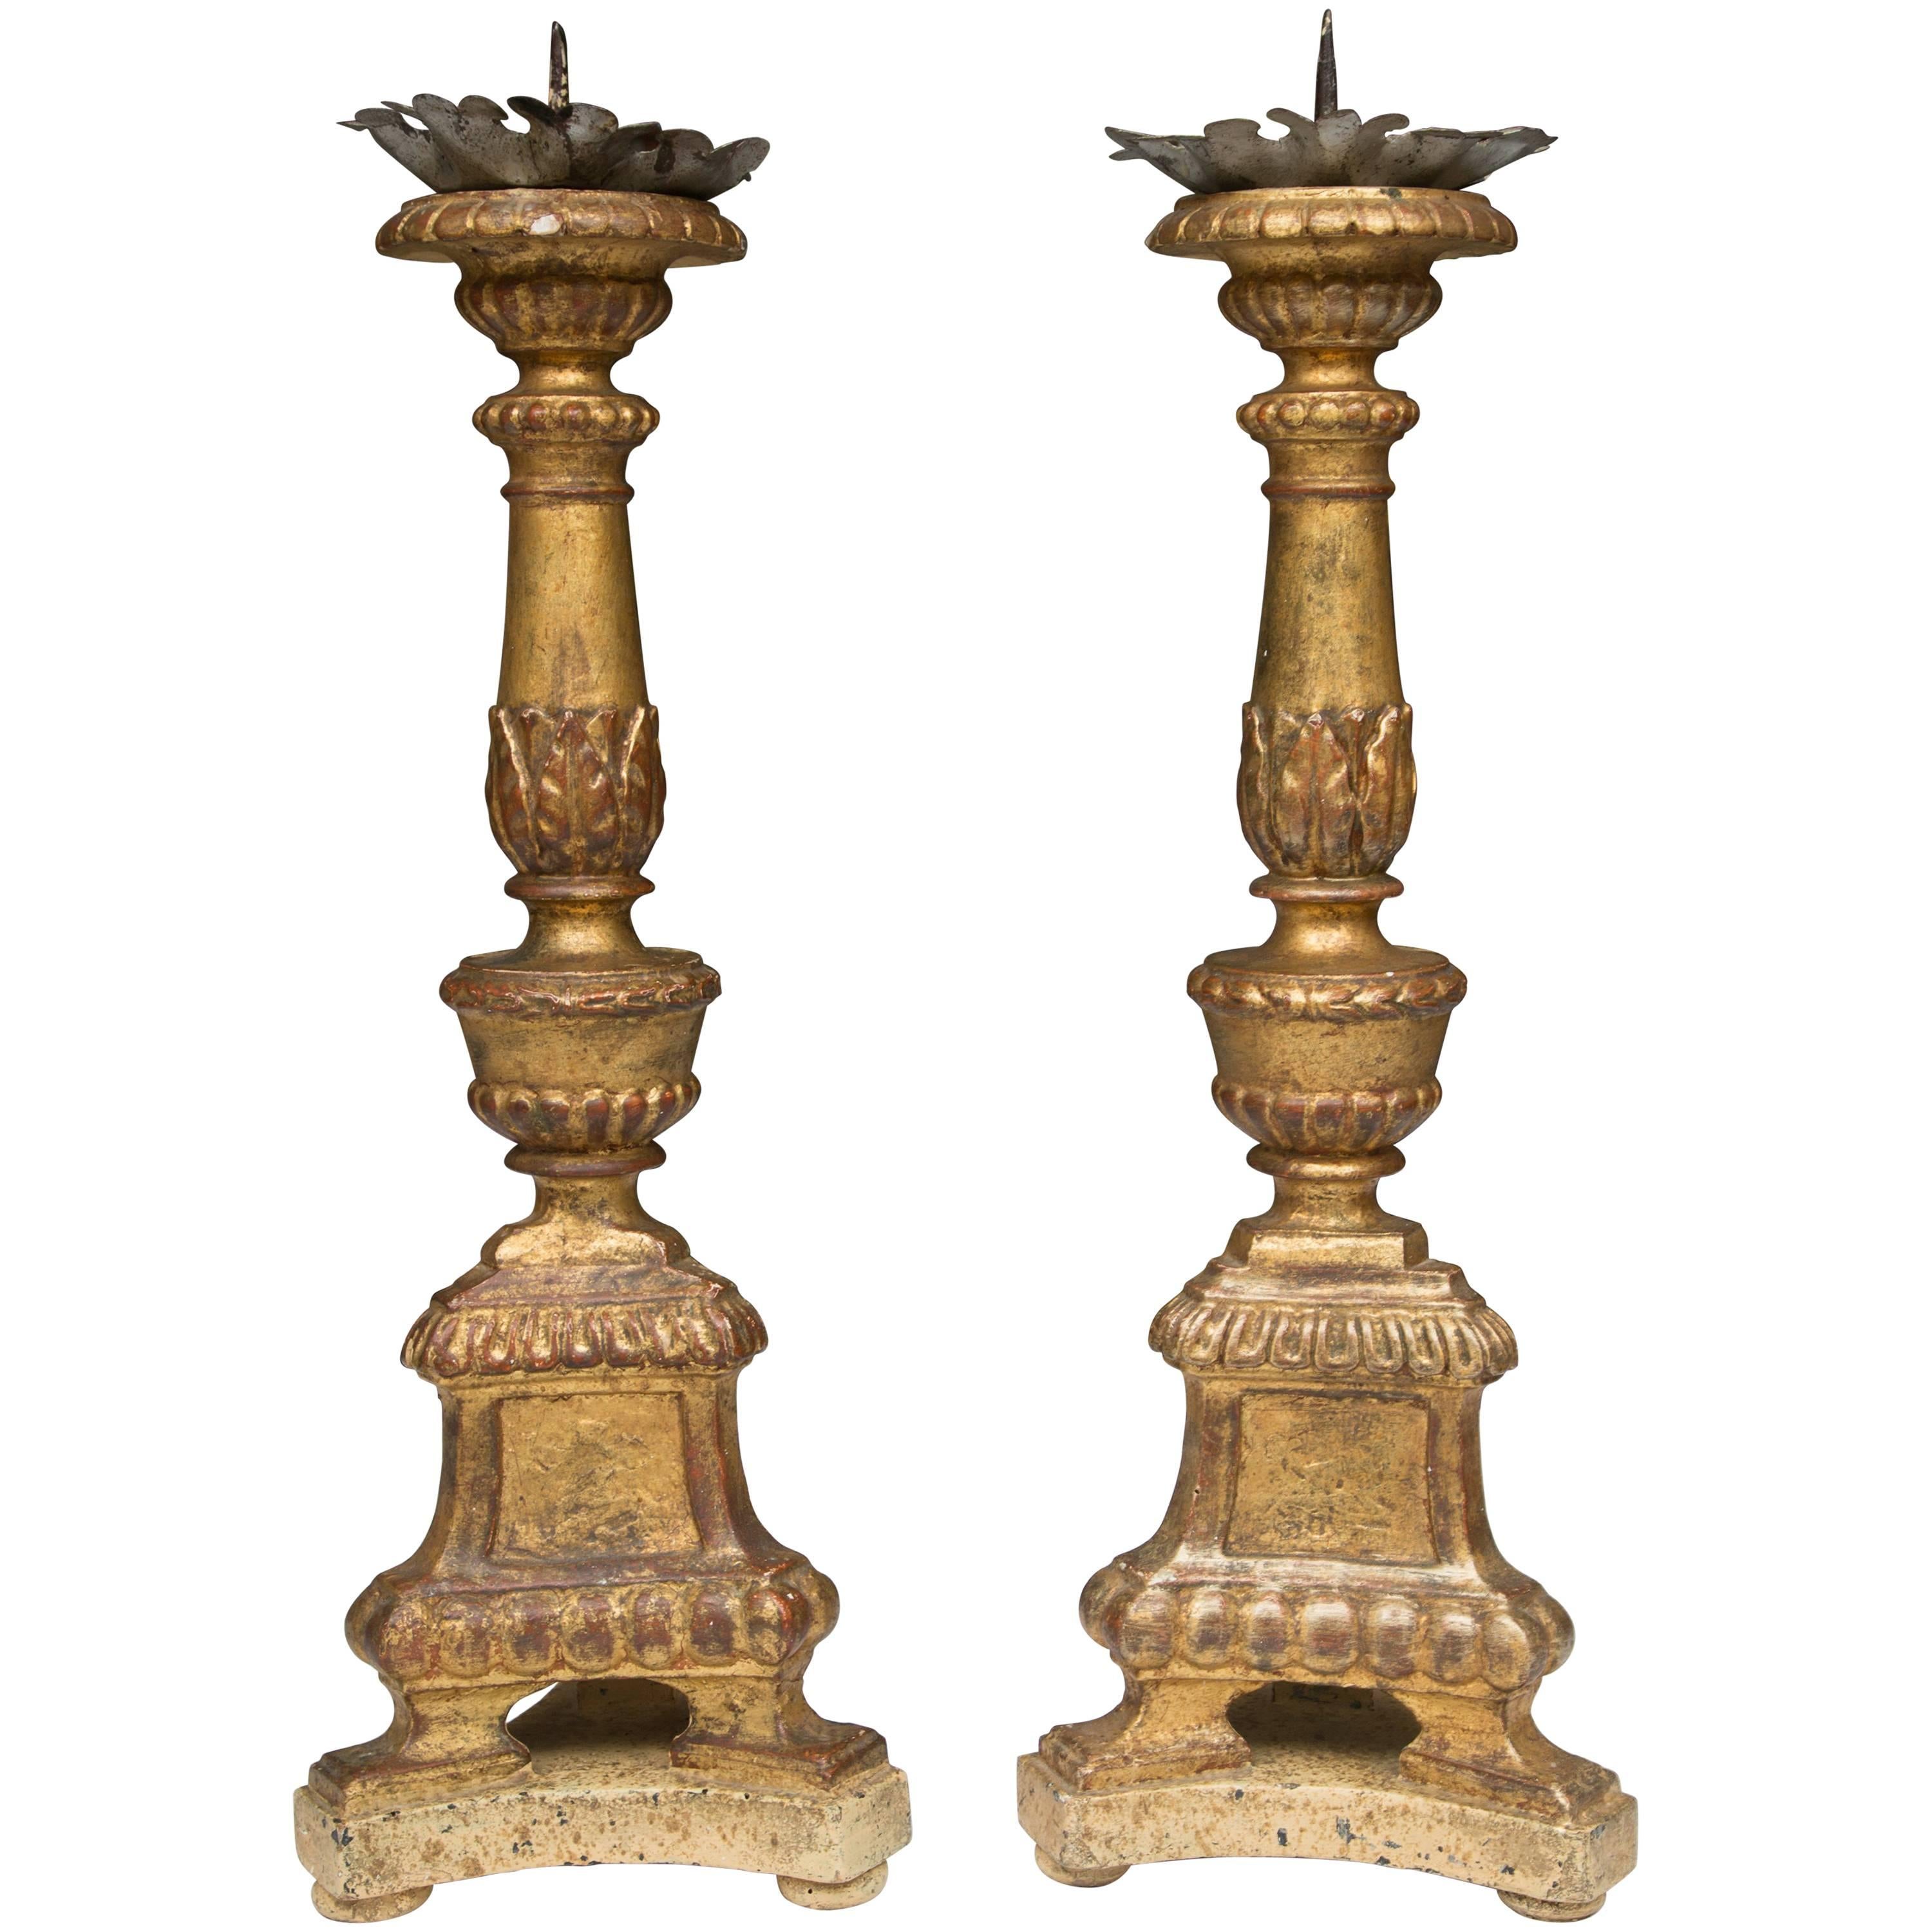 A Pair of Italian Carved Giltwood Pricket Sticks, 19th Century